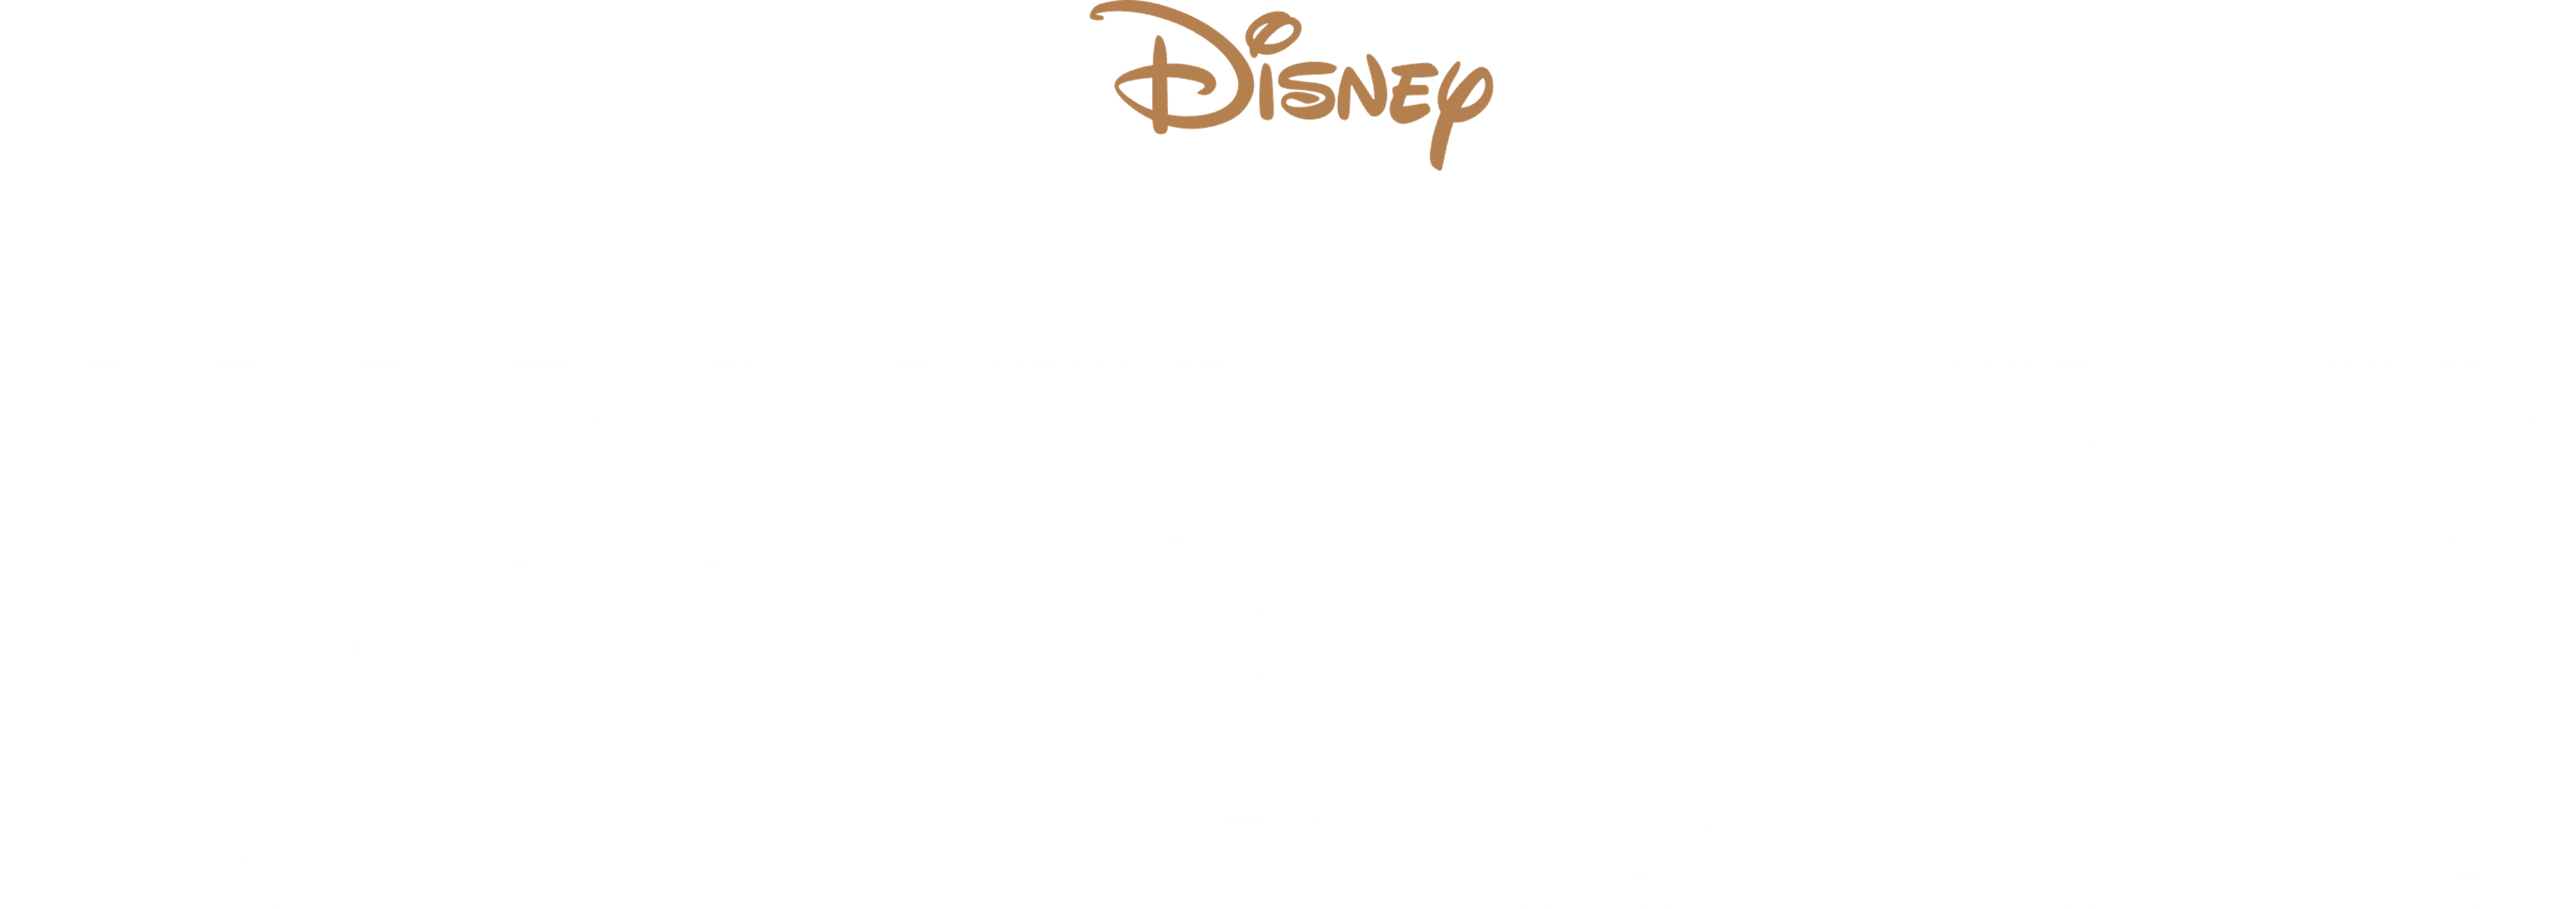 The Making of Happier Than Ever: A Love Letter to Los Angeles logo